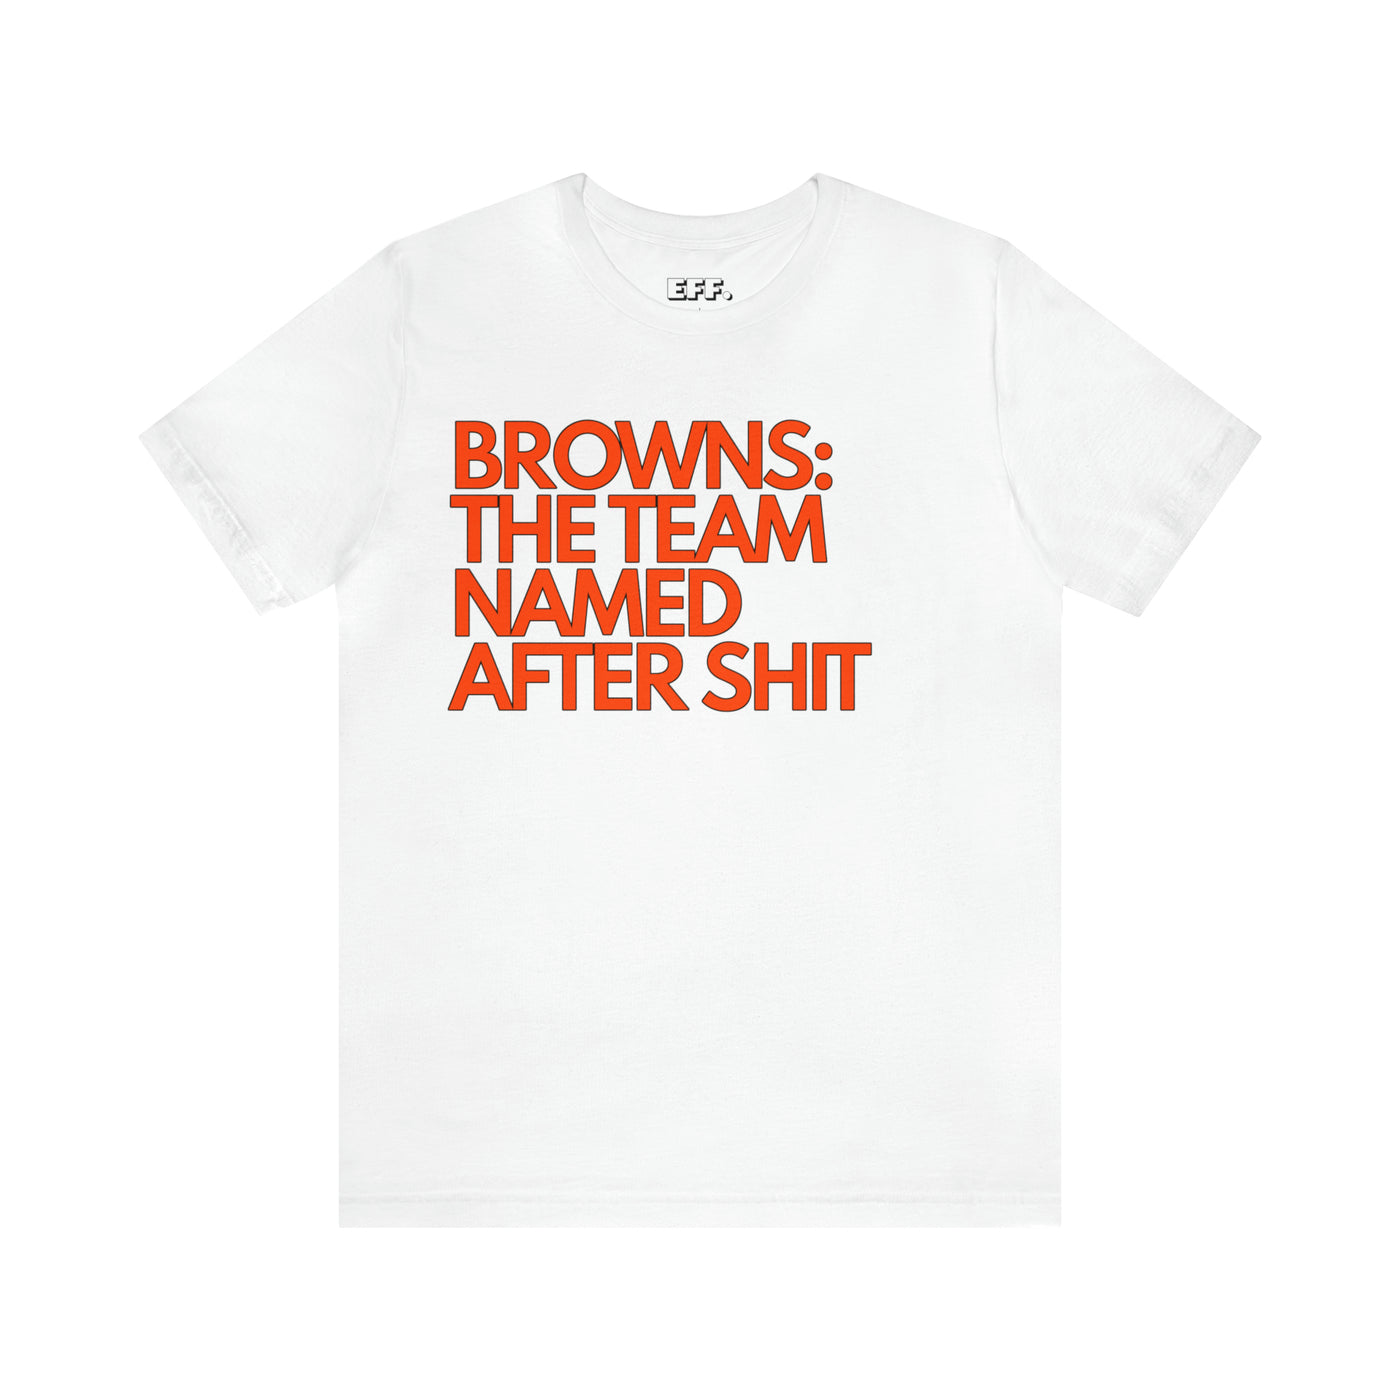 Browns: The Team Named After Shit